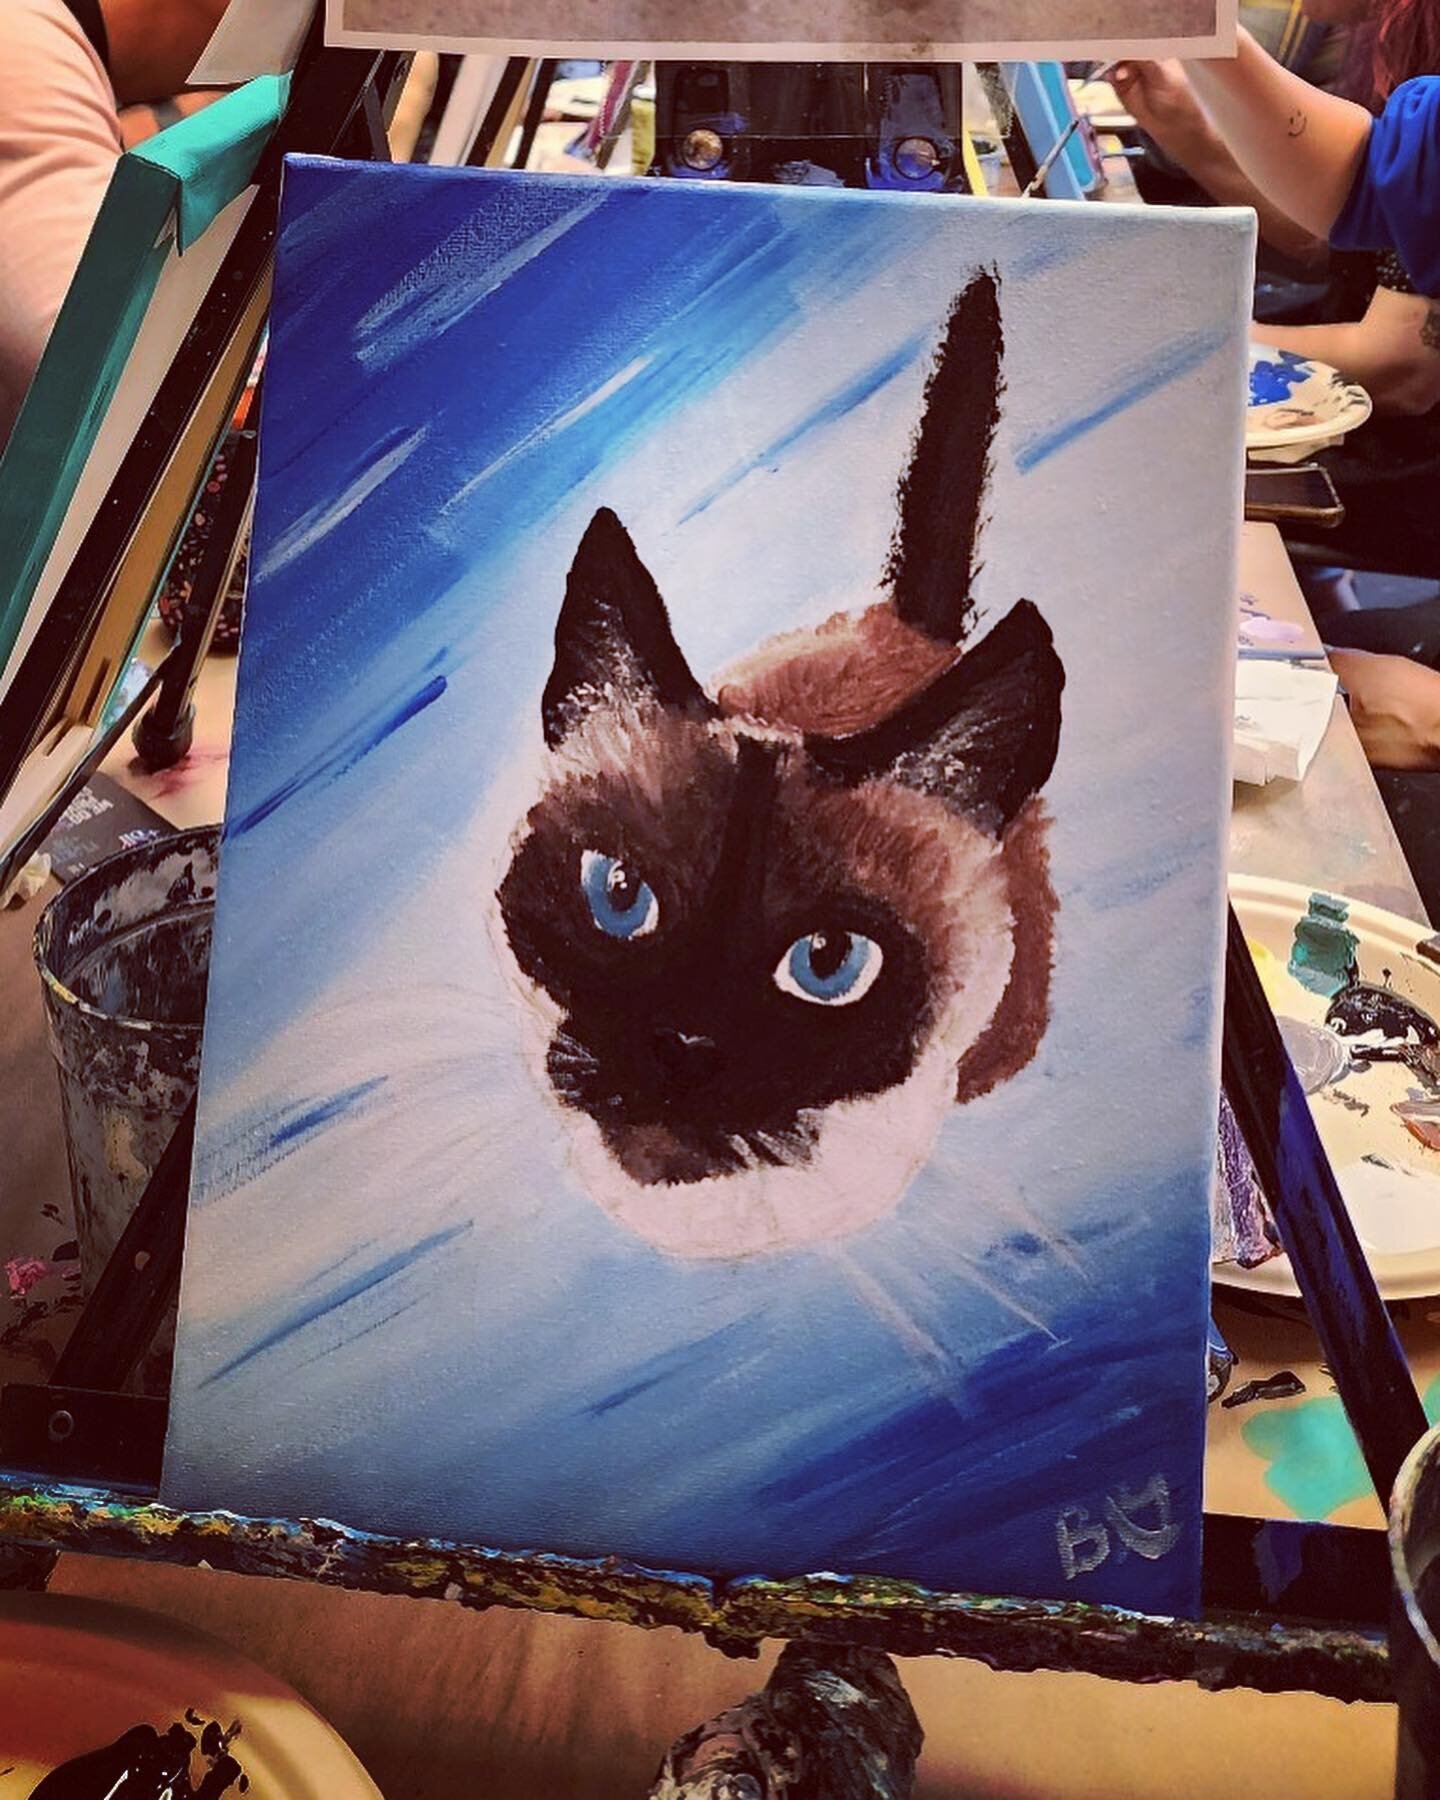 Another fun PAINT your PET event at our studio! Here&rsquo;s a few of the results, awwww so adorable! Thank you for painting your furry friends with us!  #paintyourpet #bestofla #bestoflosangeles #brushstrokesandbevs #brushstrokesandbeverages #art #a